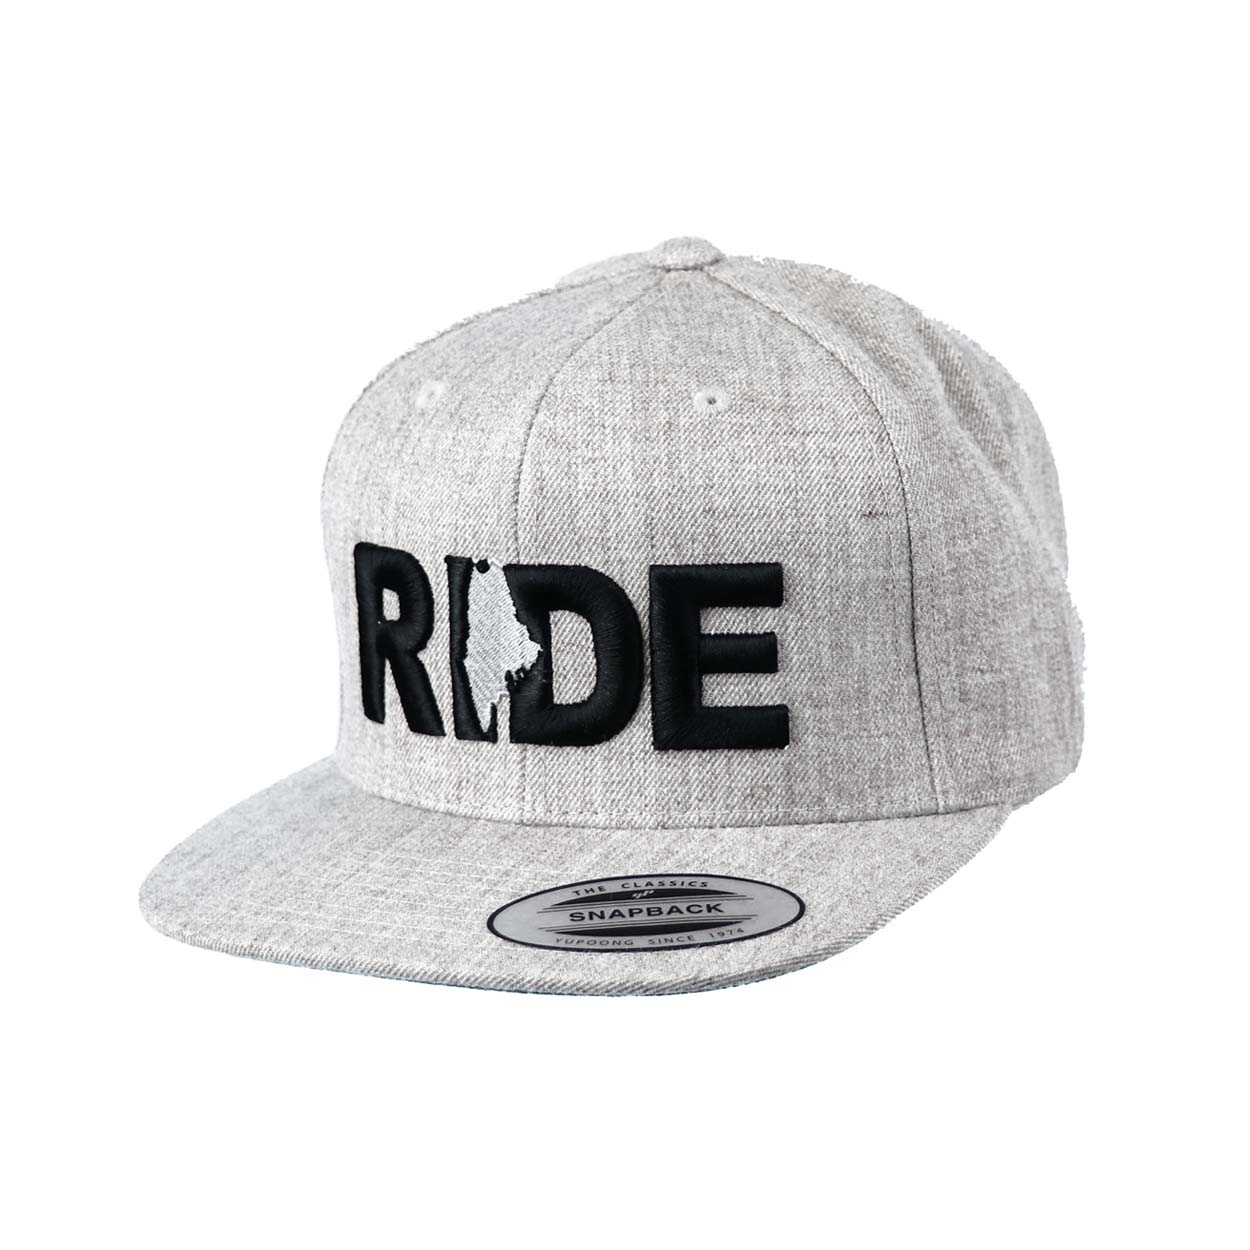 Ride Maine Classic Pro 3D Puff Embroidered Snapback Flat Brim Hat Heather Gray